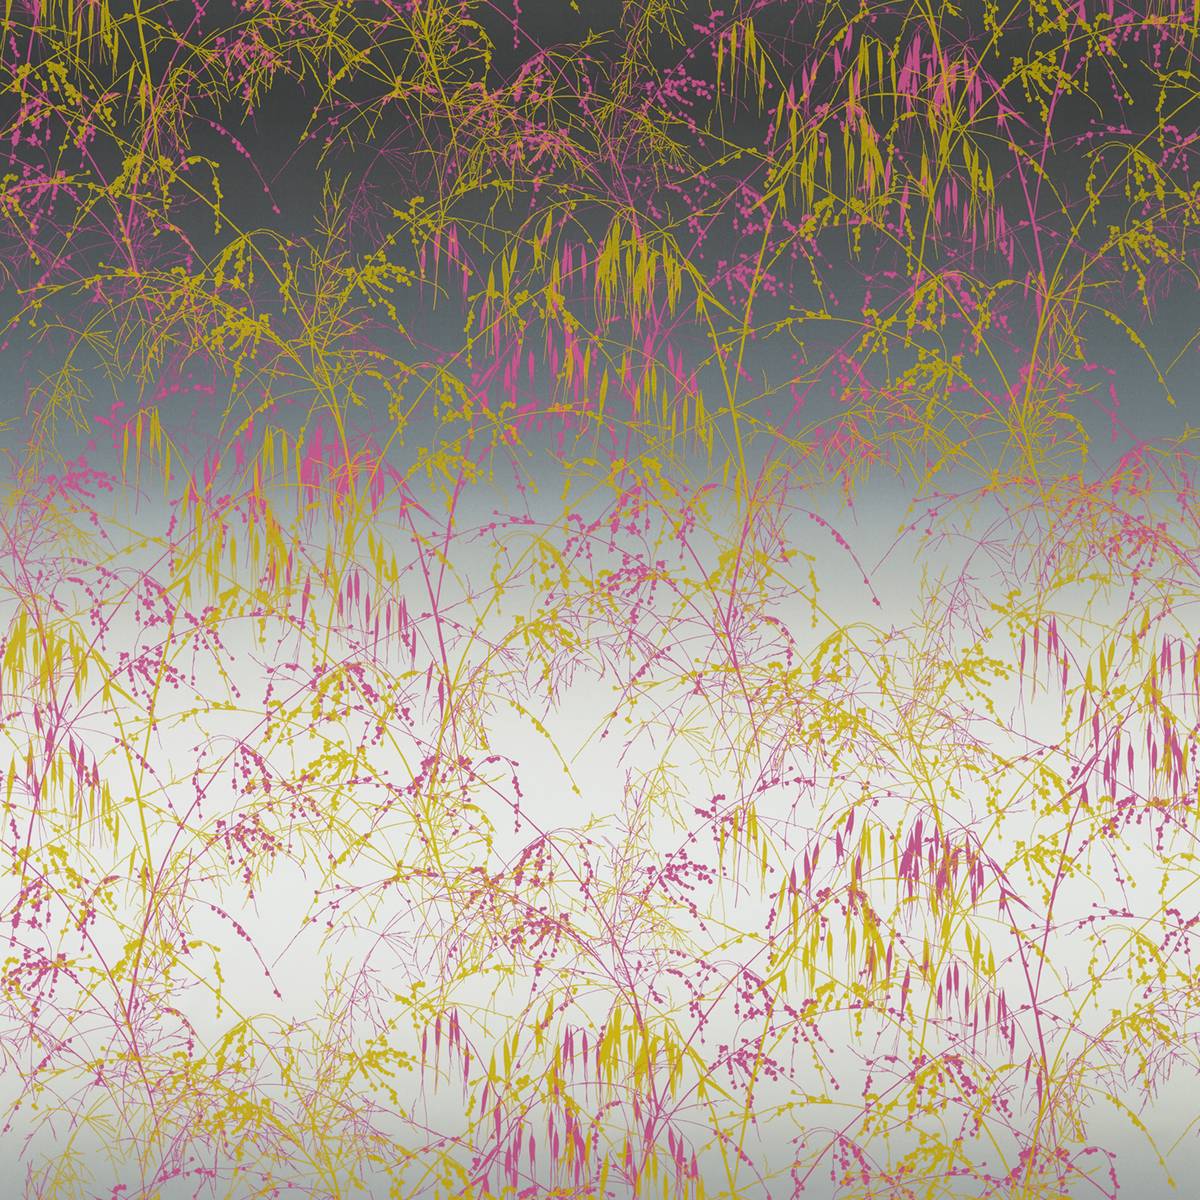 Meadow Grass Mist/Fluoro Fabric by Harlequin